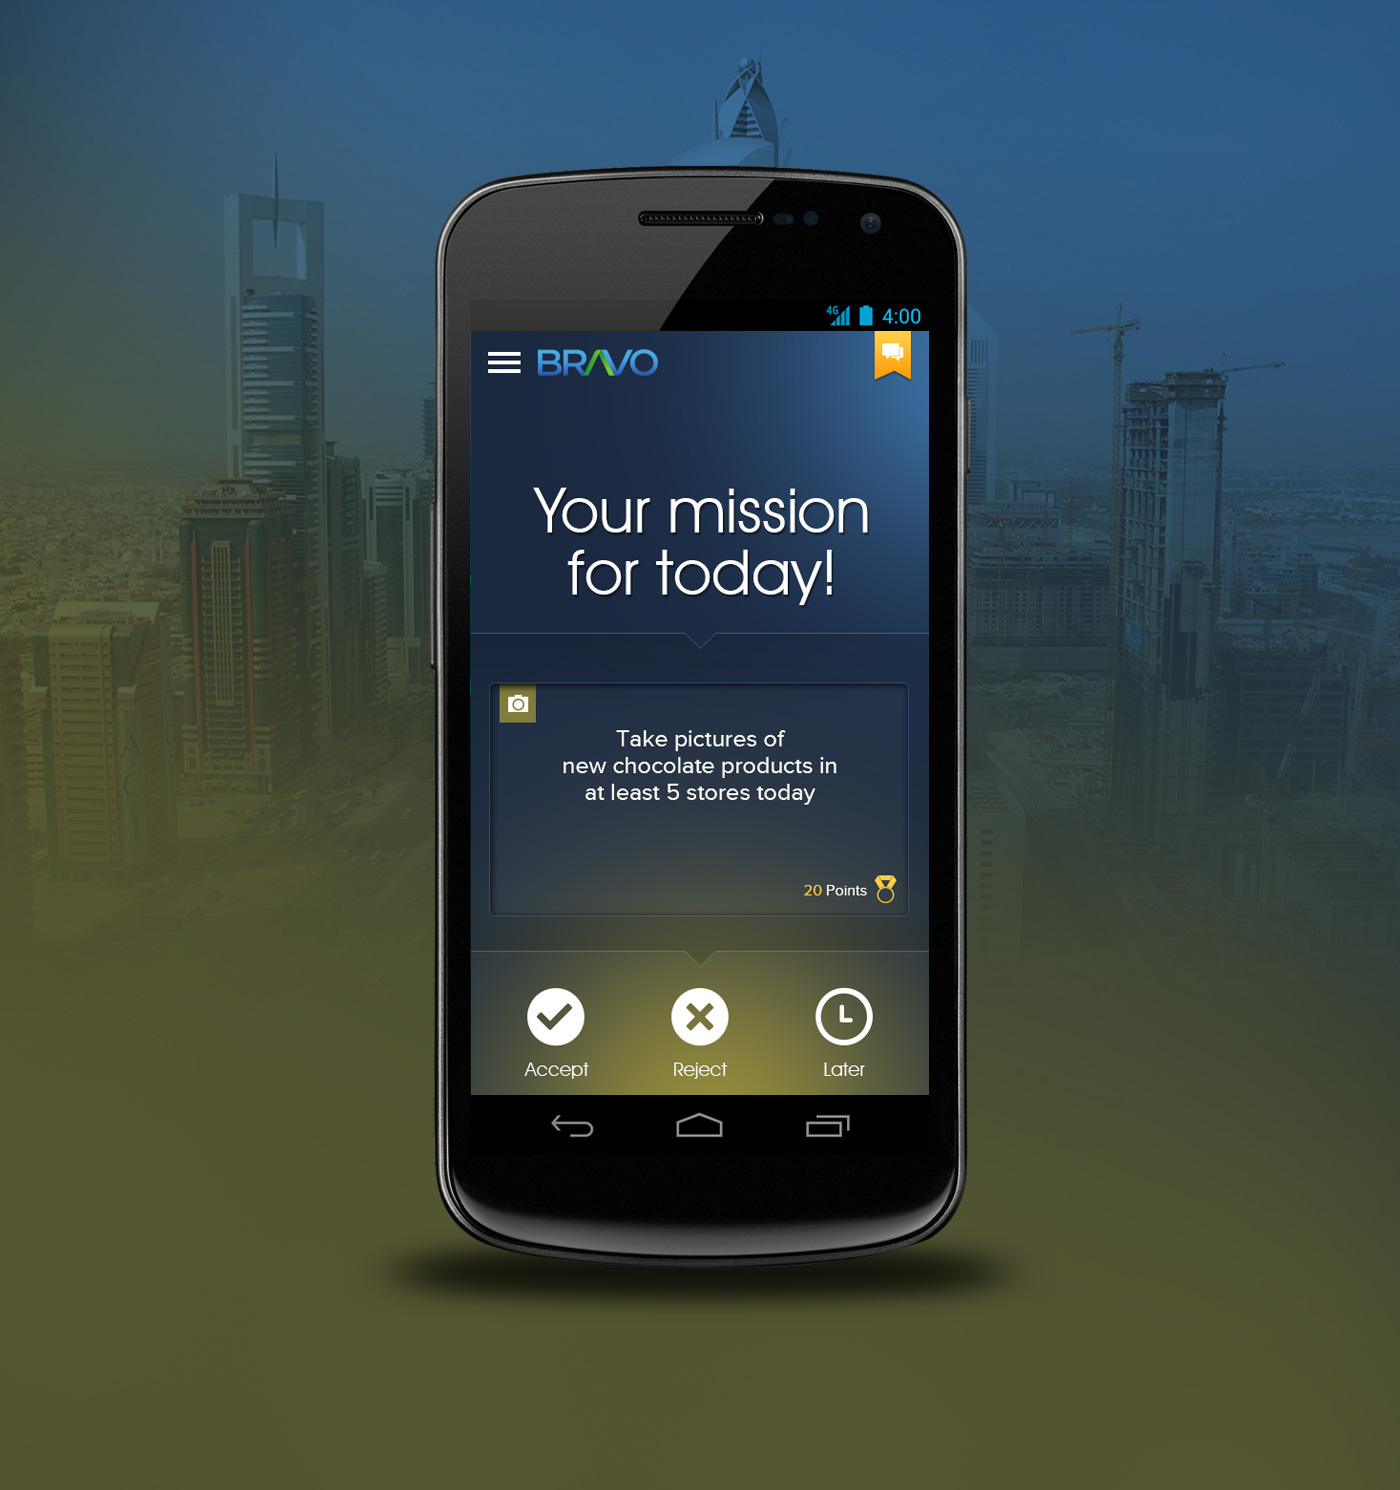 Android App FD UI ux awesome mission ios business fahaddesigns.com digital blue yellow icons